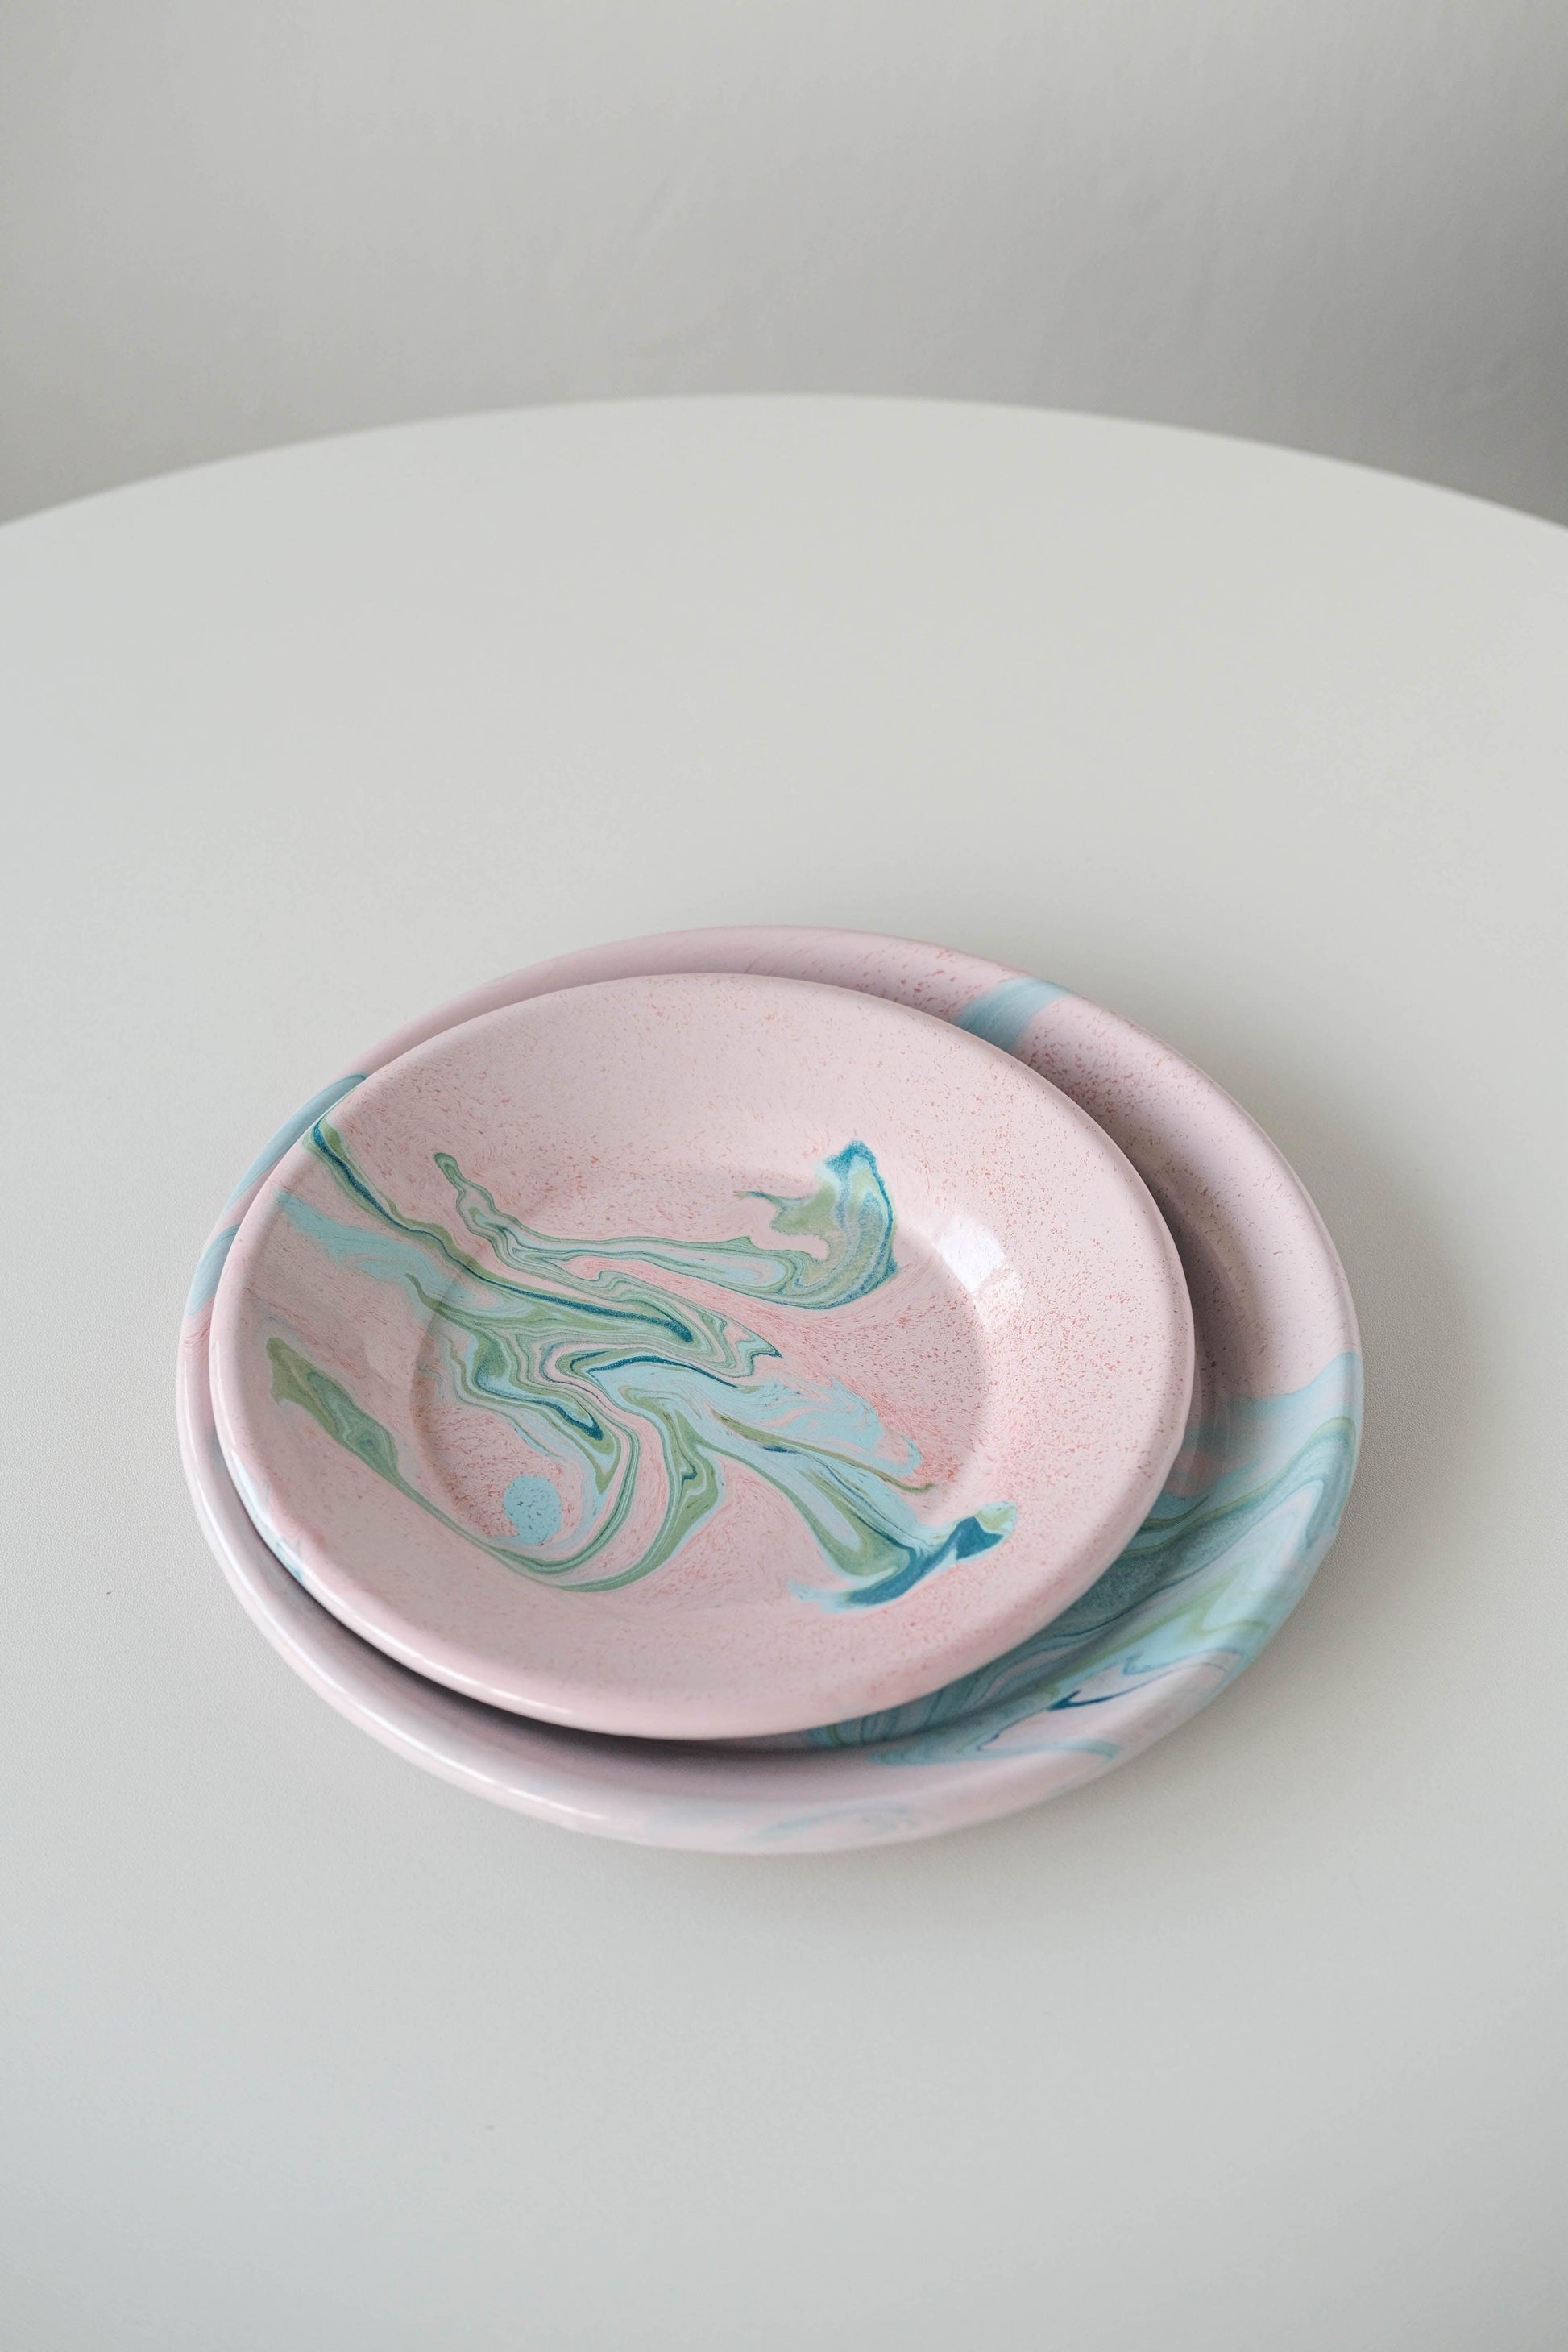 Bornn | New Marble Plate - Late Morning